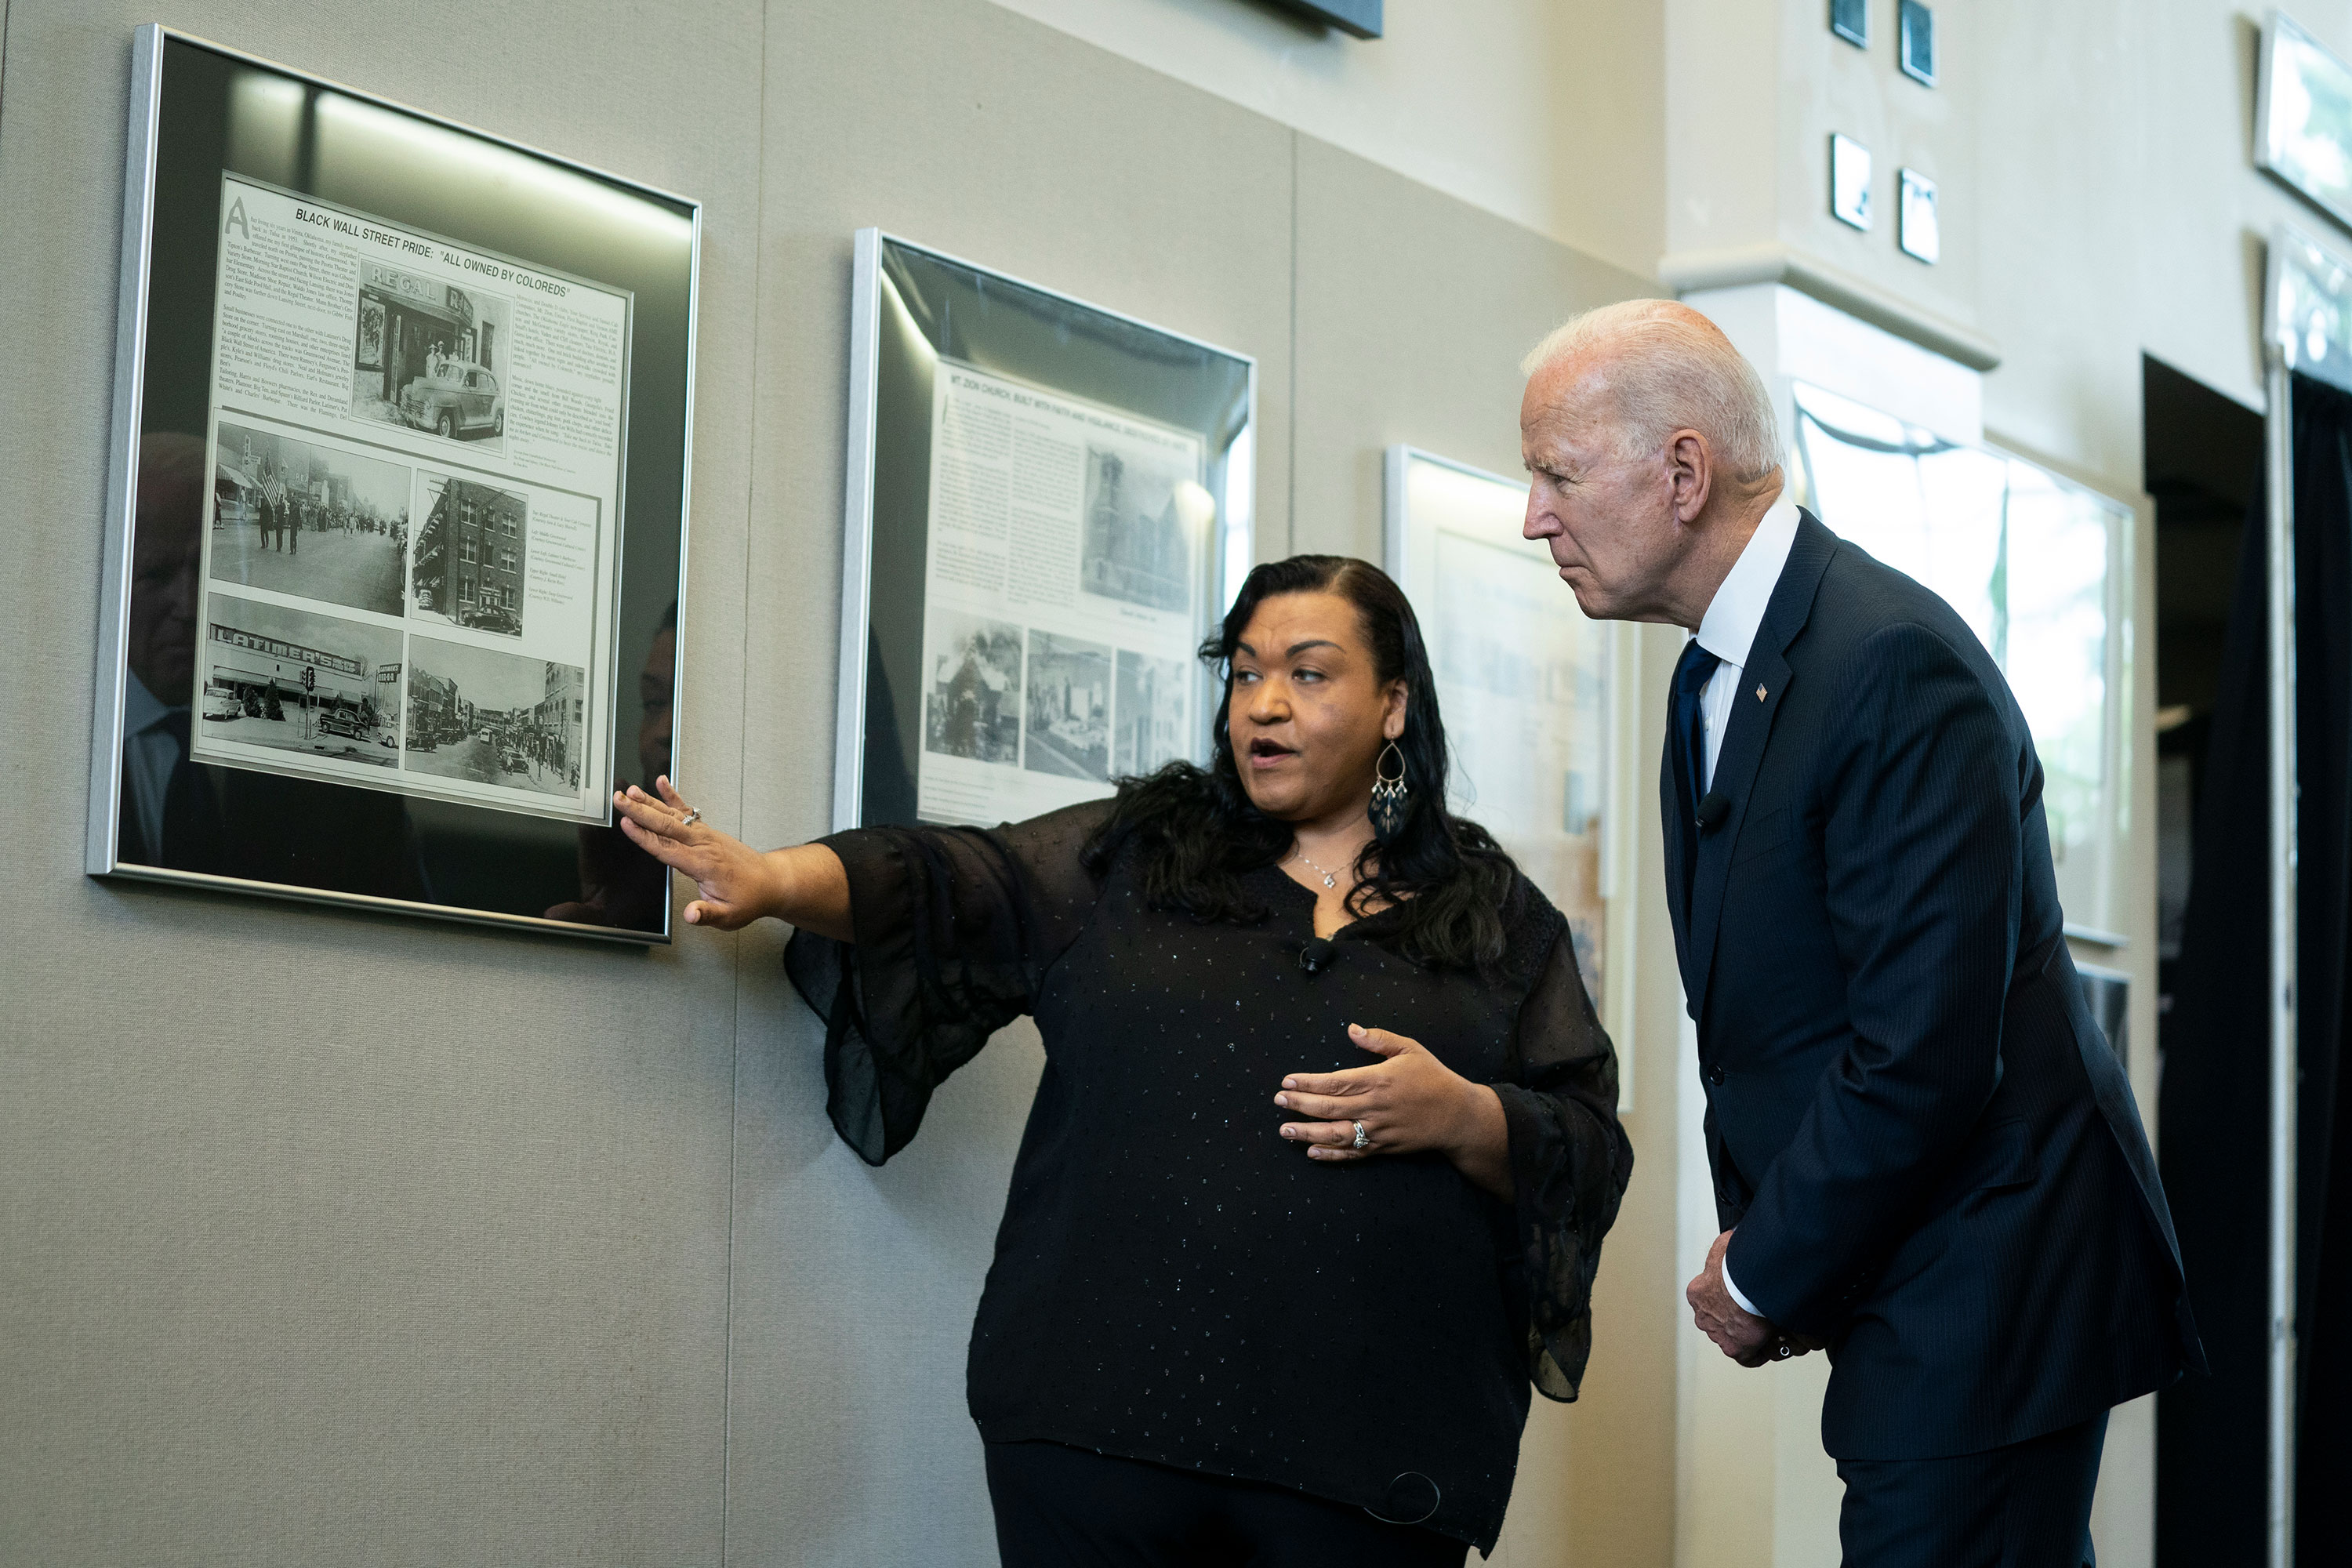 Michelle Brown-Burdex, program coordinator of the Greenwood Cultural Center, speaks as she leads President Joe Biden on a tour of the Greenwood Cultural Center in Tulsa, Oklahoma, on June 1.